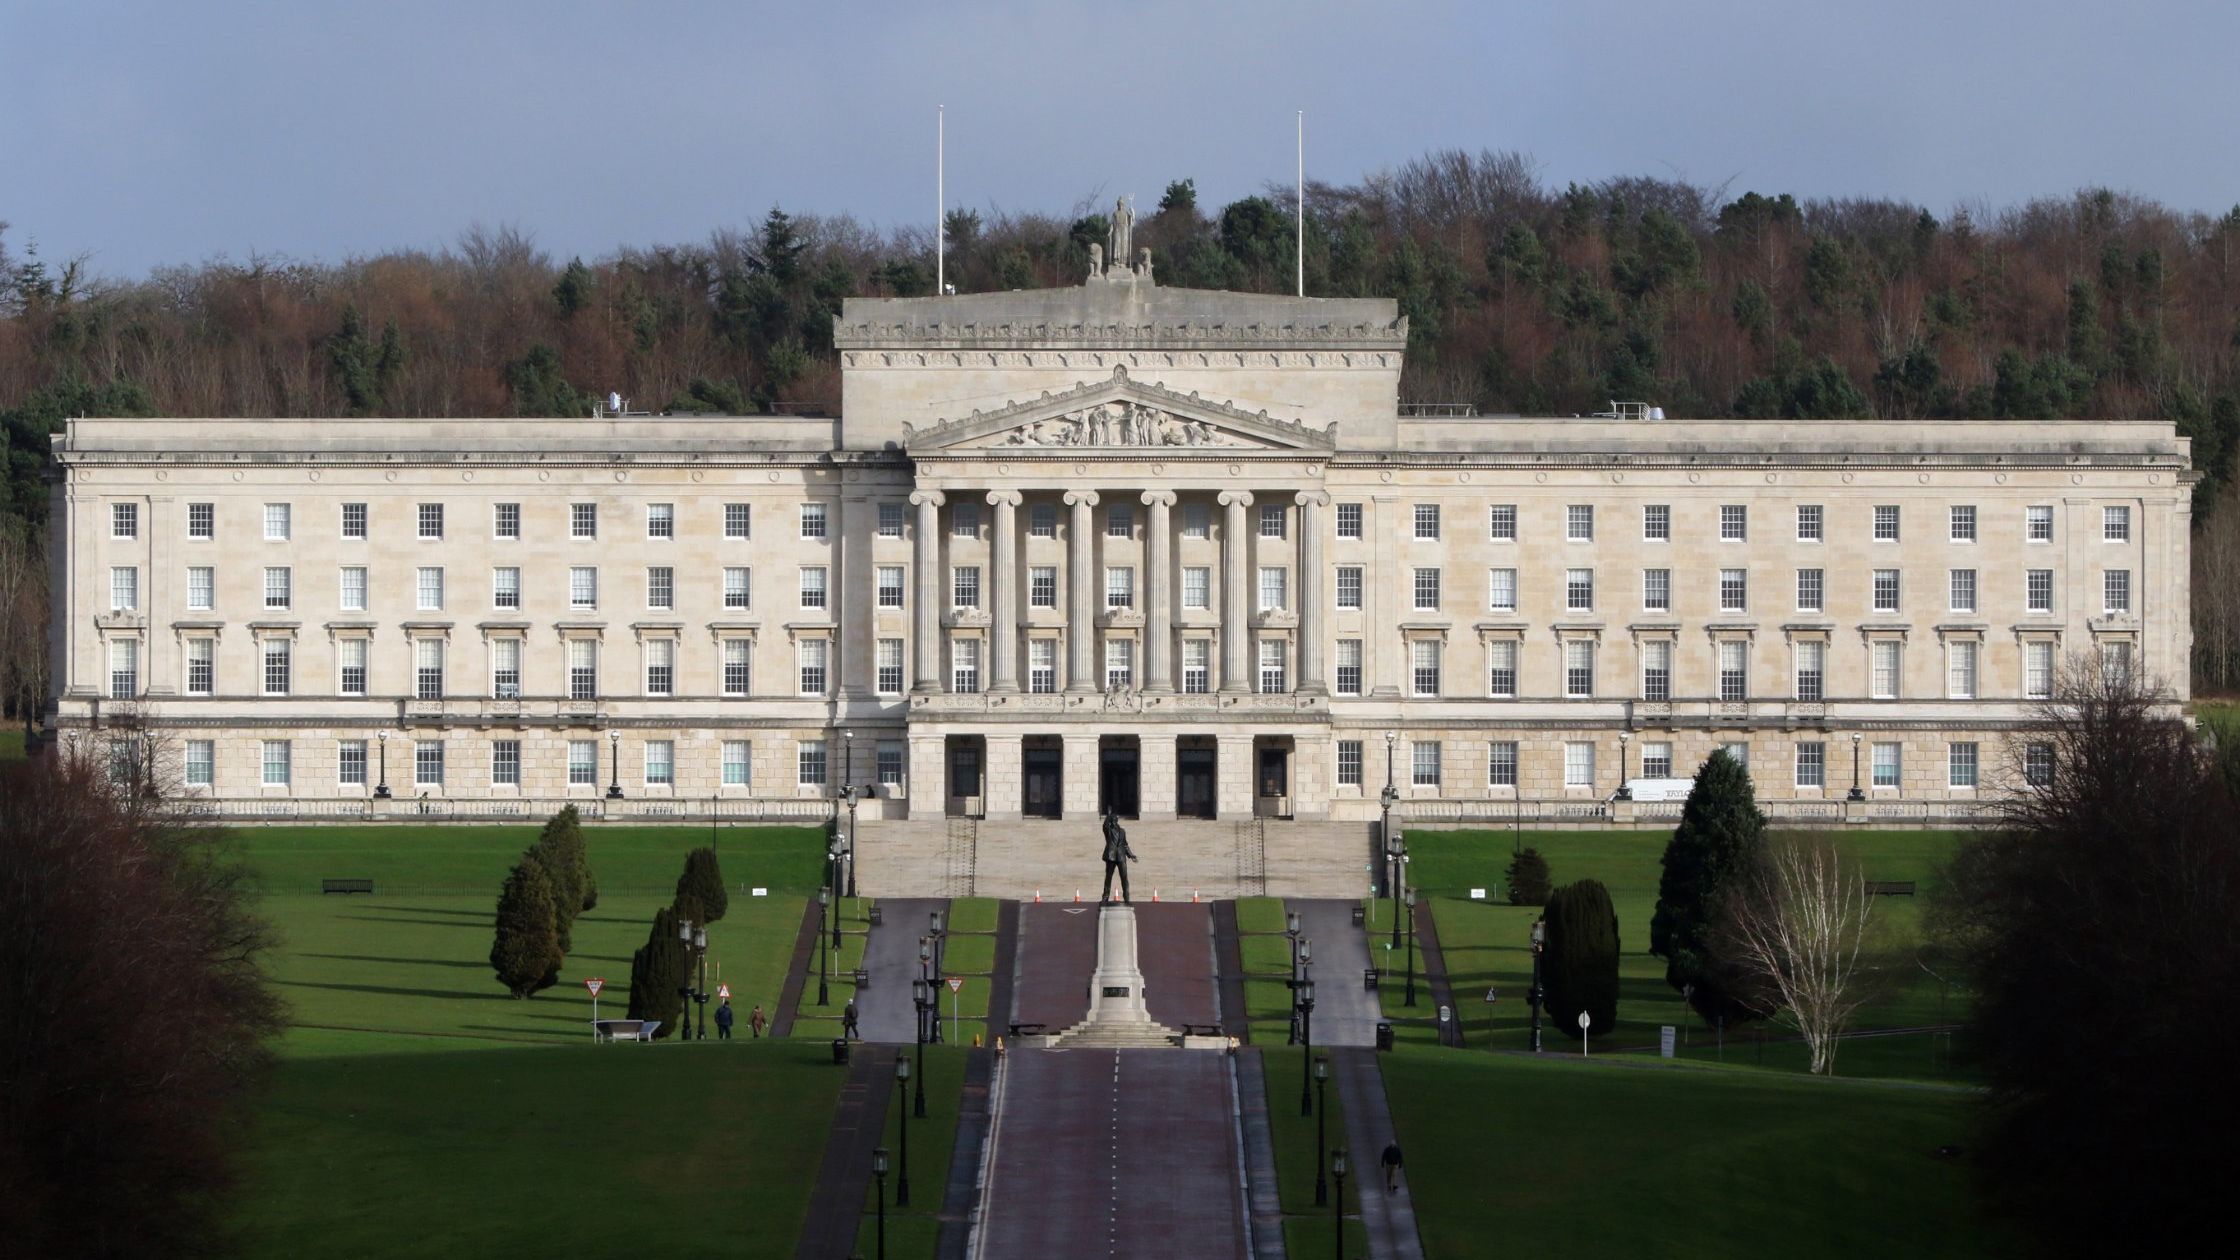 Since a snap election on March 2, Northern Ireland has been in political crisis.